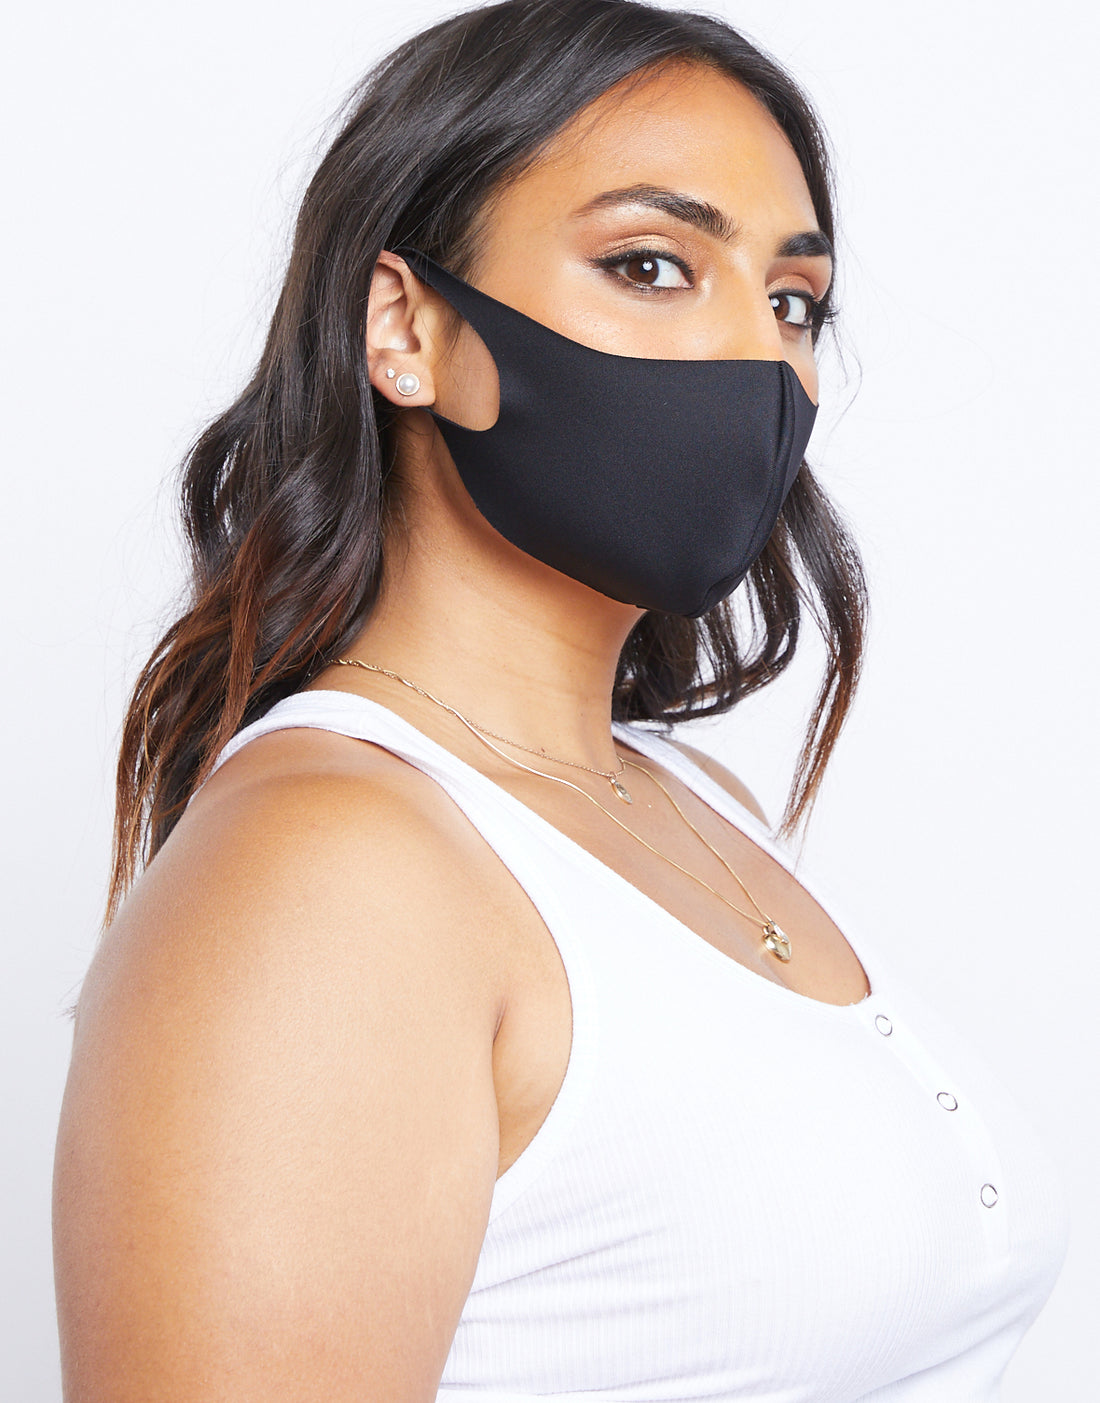 Stretchy Comfort Mask Accessories -2020AVE